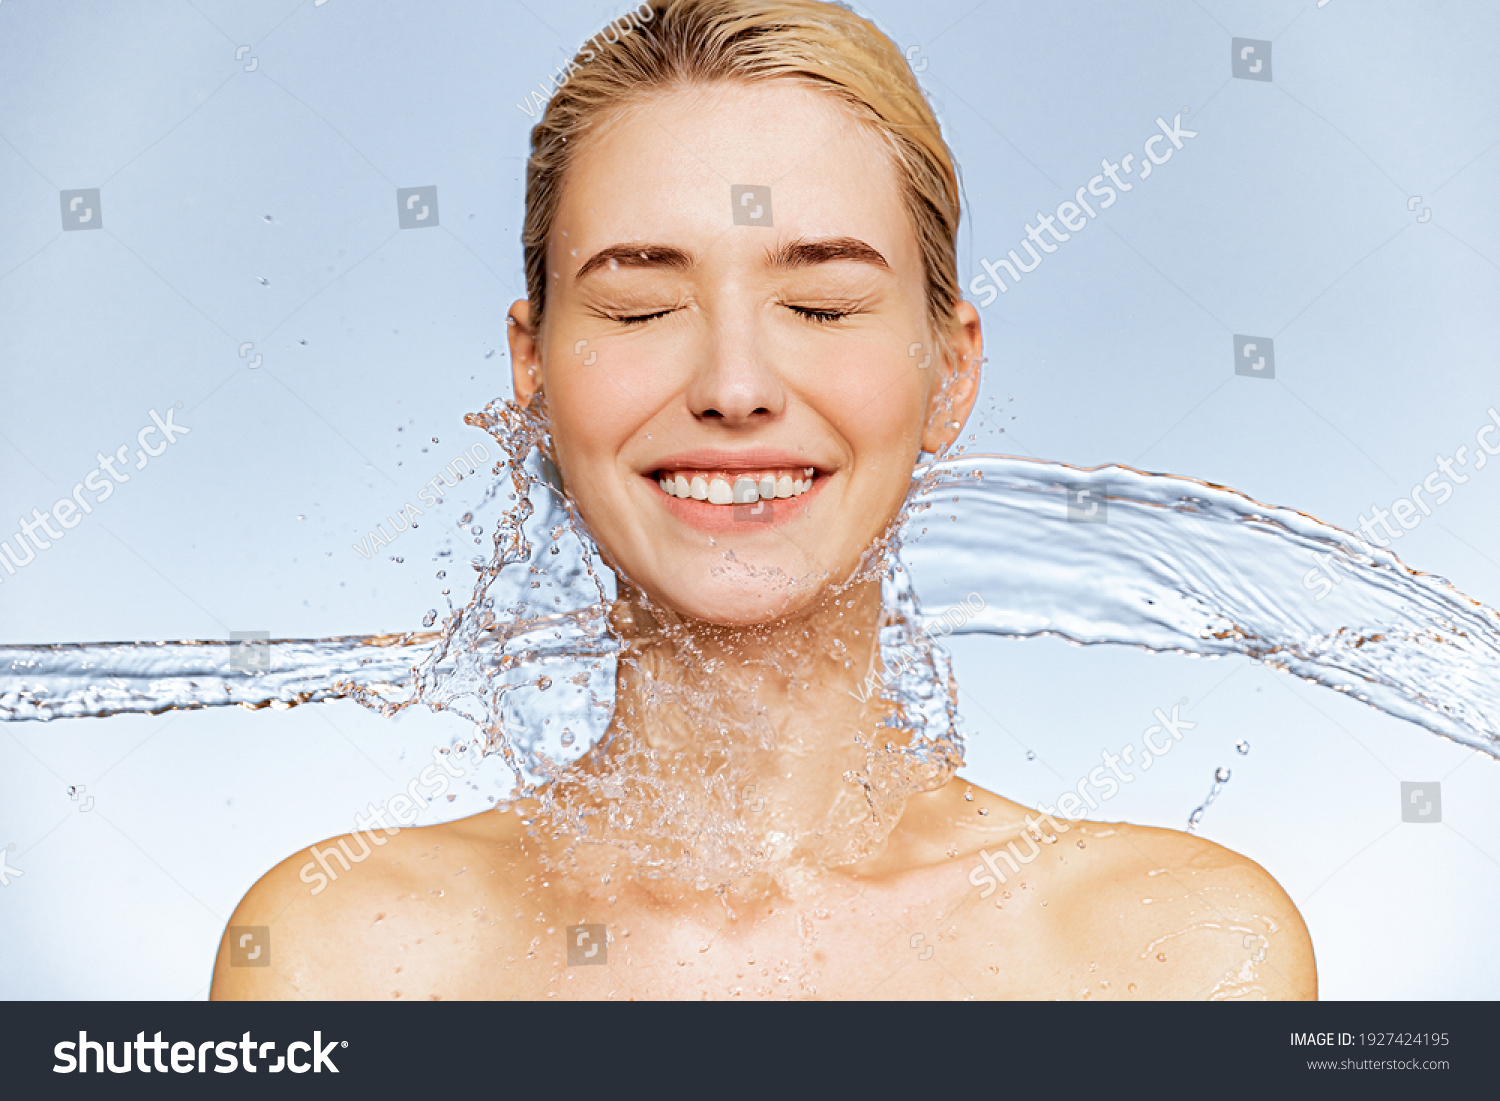 Photo of  young  woman with clean skin and splash of water. Portrait of smiling woman with drops of water around her face. Spa treatment. Girl washing her body with water. Water and body. #1927424195